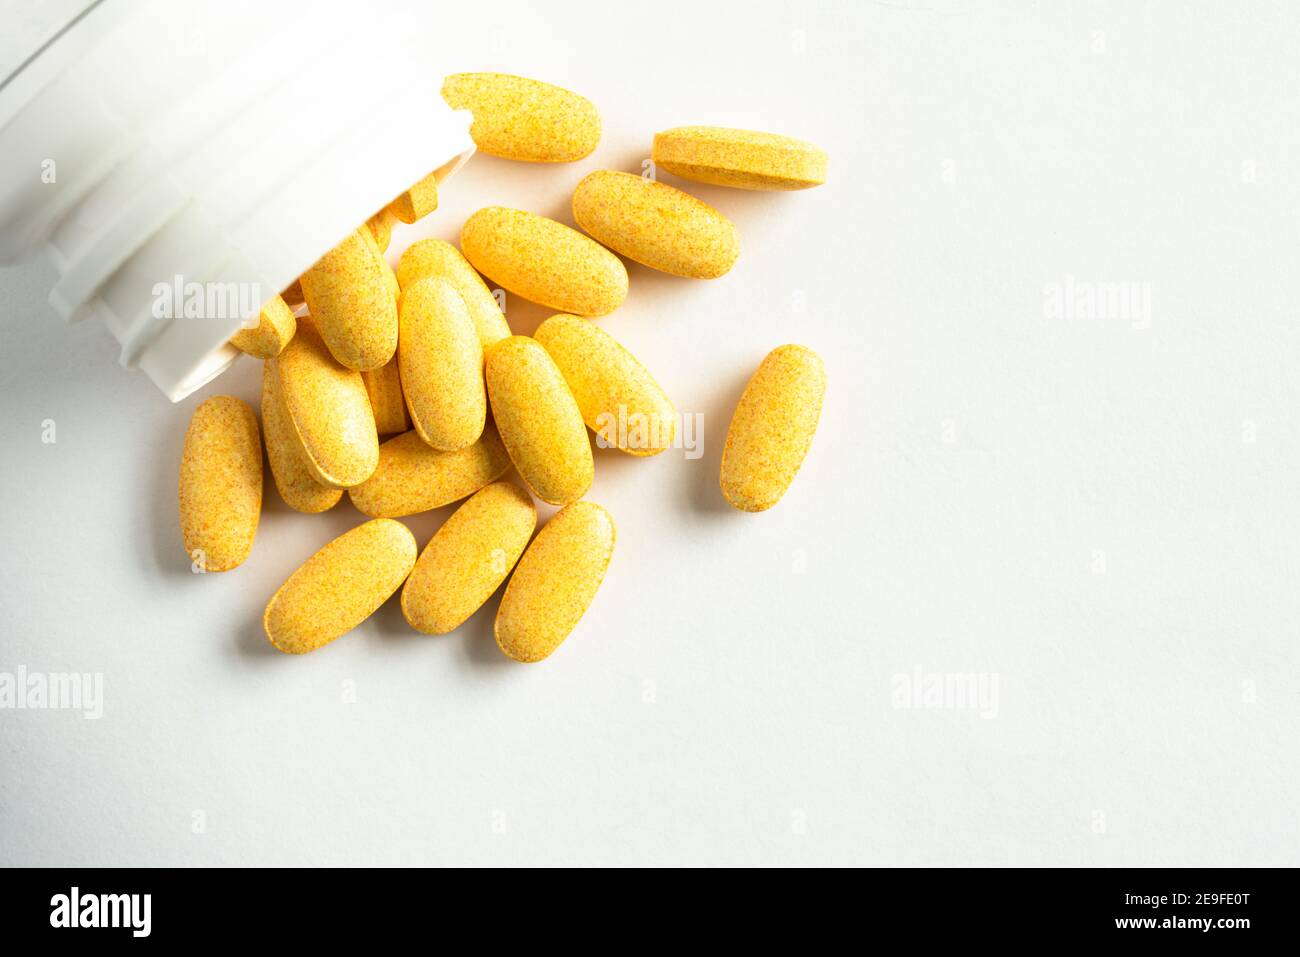 Vitamin B Complex Supplements Spilled from a Bottle Stock Photo